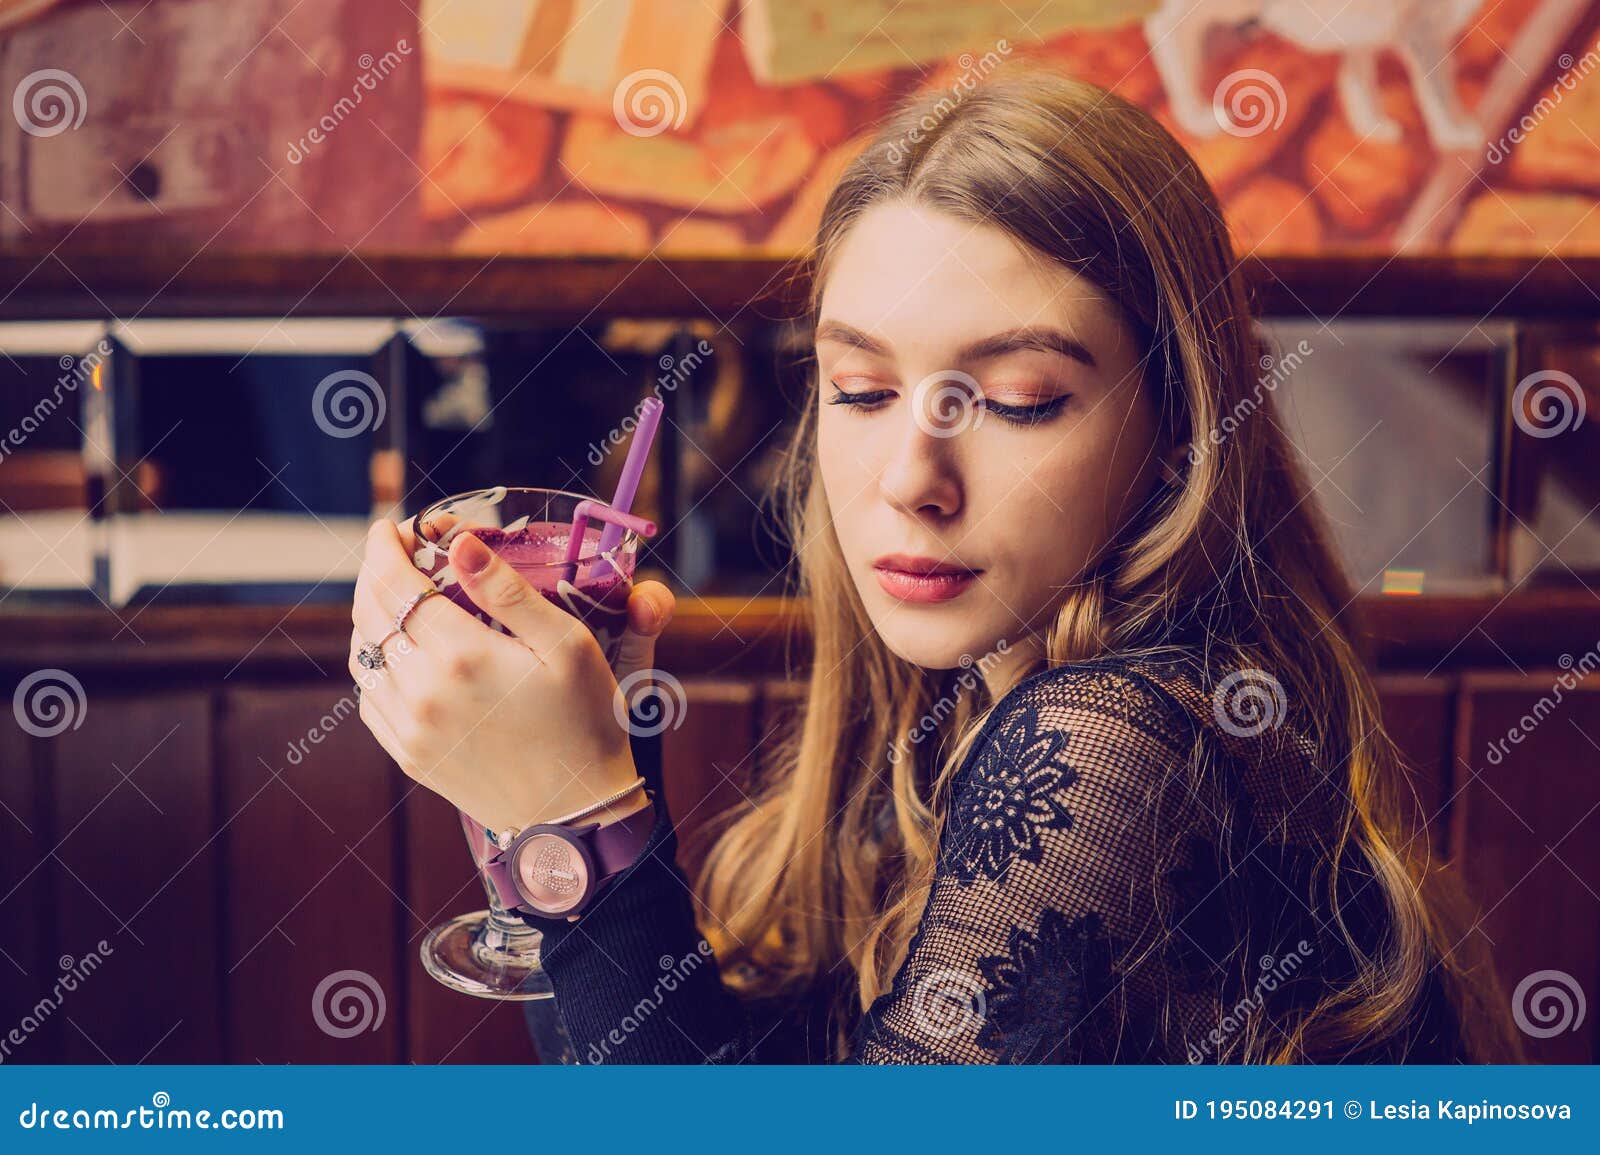 Beautiful Young Woman with Fruit Smoothie. Girl Drinking Smoothie in a ...